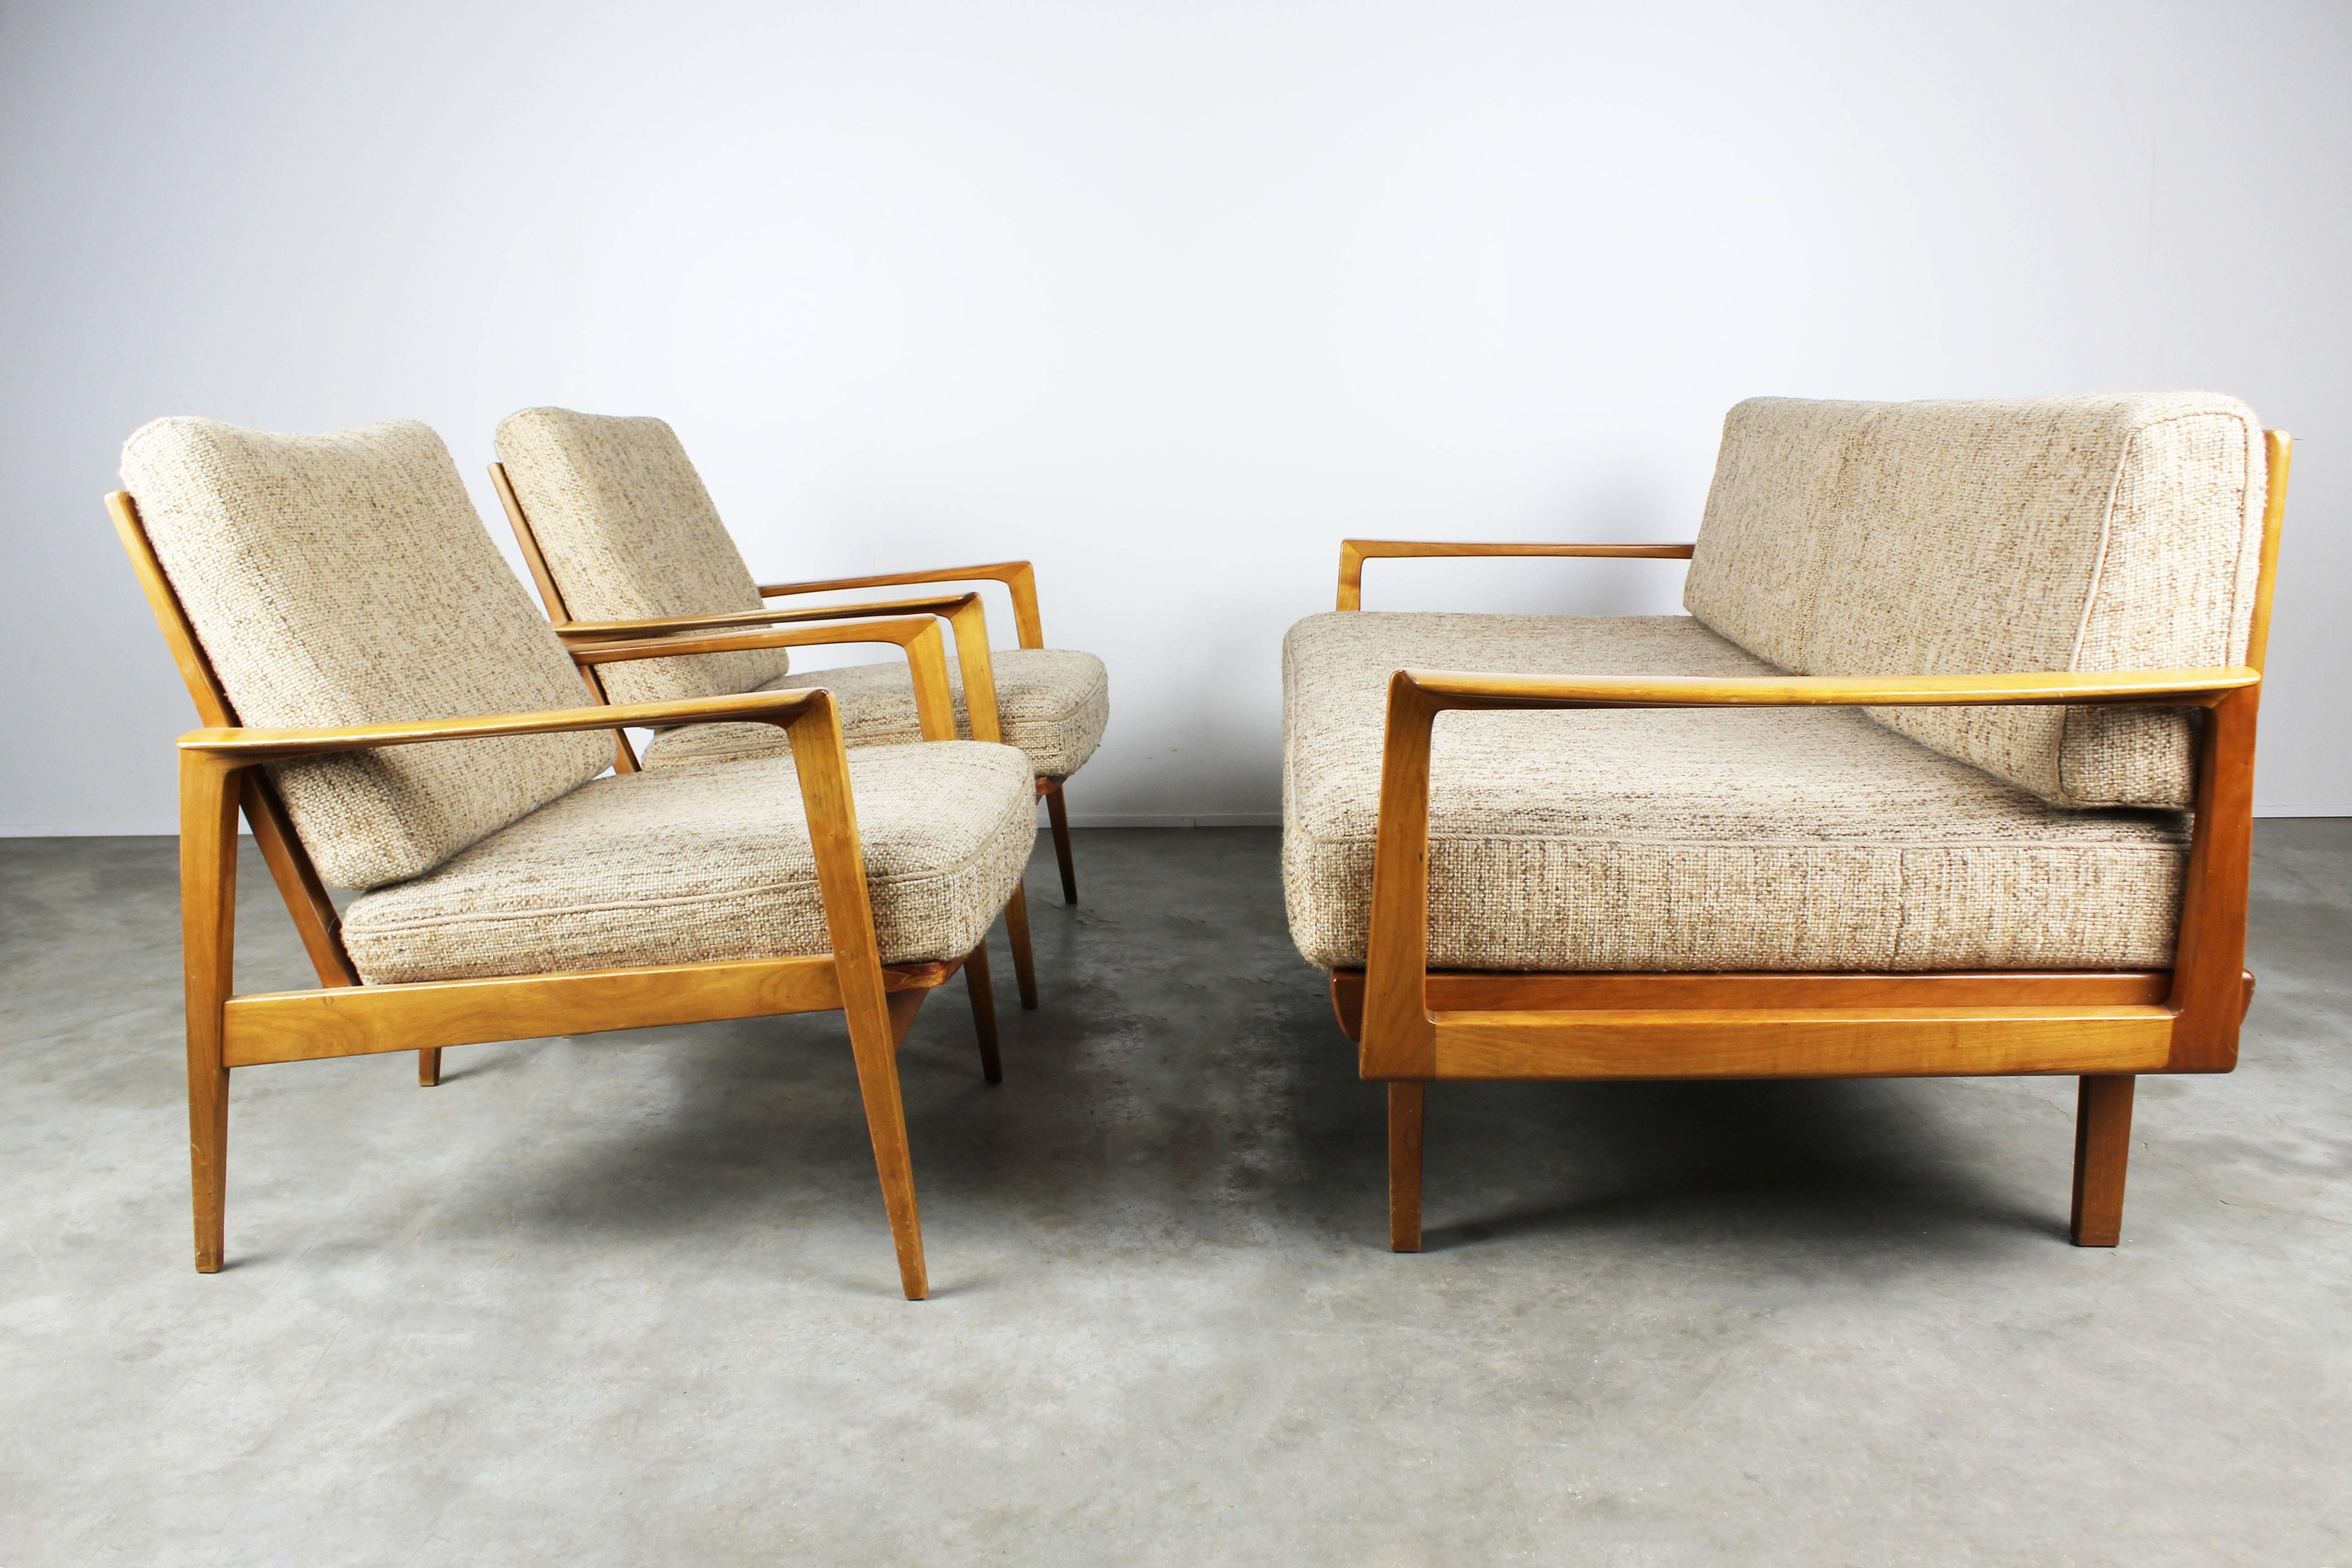 Rare fully original living room set with two lounge chairs and Magic sofa / daybed by Knoll Antimott, 1950. 
The sofa can be turned around in a comfortable daybed in a manner of seconds. Wonderfull sculpted wood frame and minimalist metal